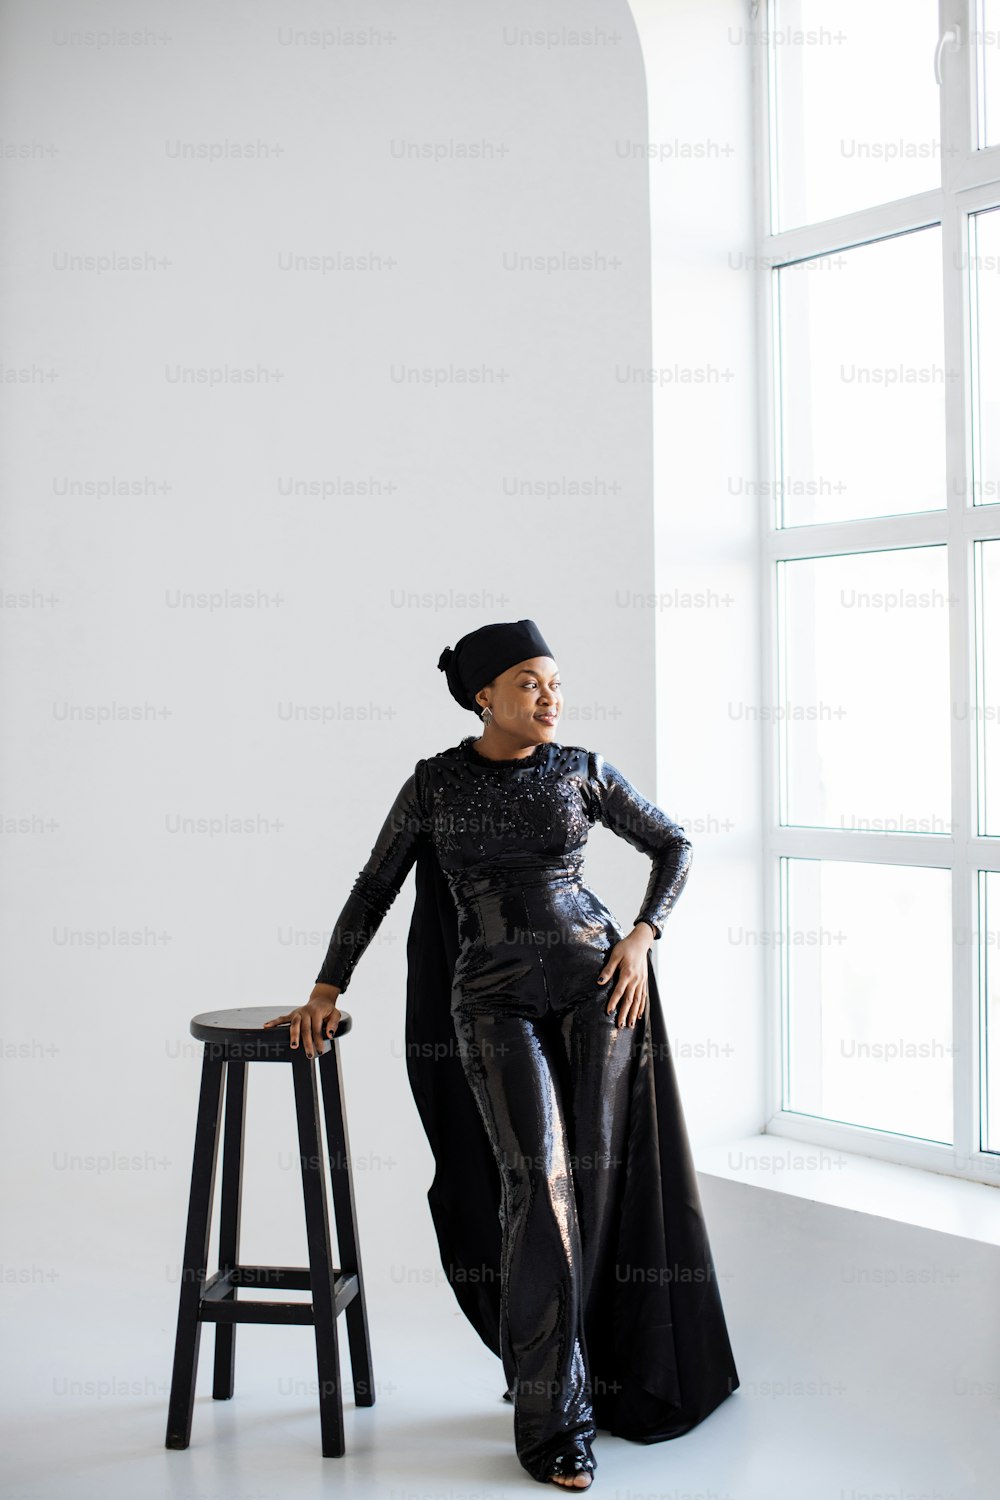 Stunning african american woman wearing stylish black hat and clothes leaning on high chair and looking at window. White studio background.